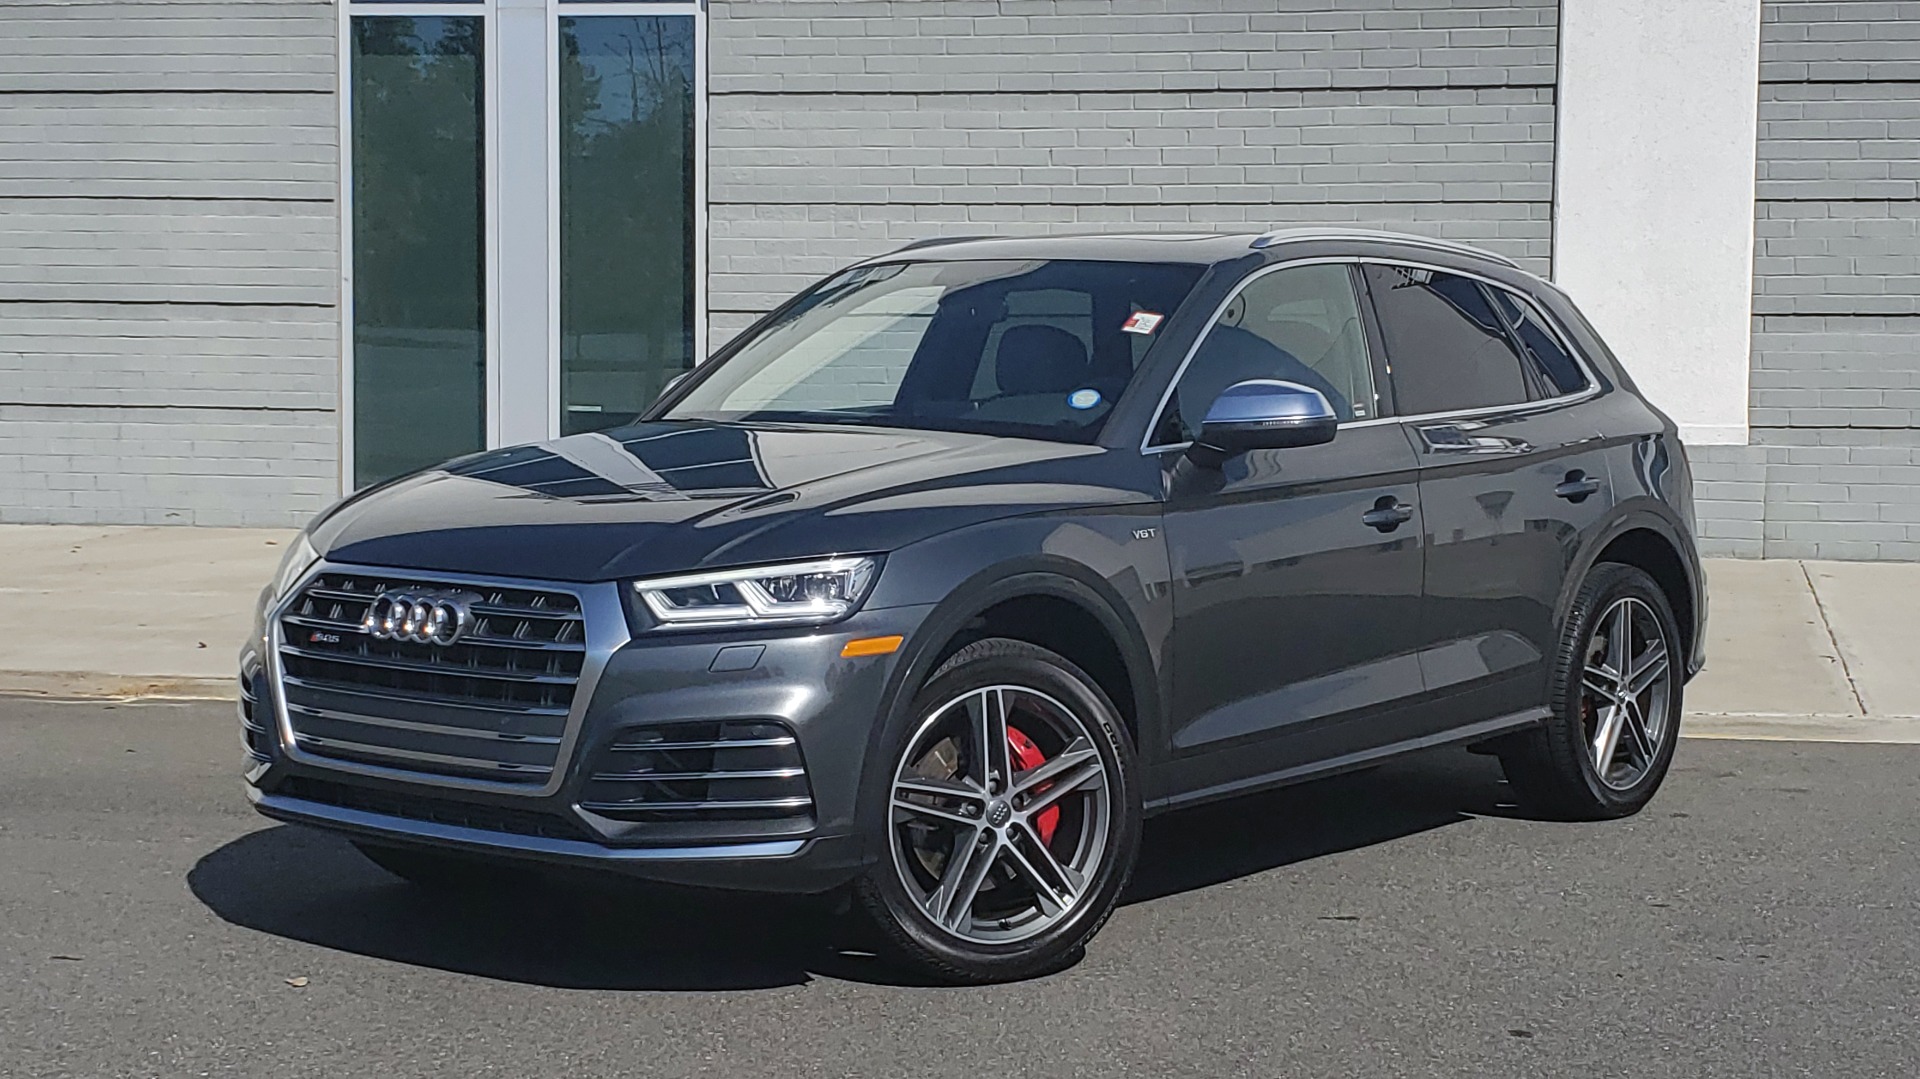 Used 2018 Audi SQ5 PREMIUM PLUS SPORT / NAV / B&O SND / SUNROOF / REARVIEW for sale Sold at Formula Imports in Charlotte NC 28227 1